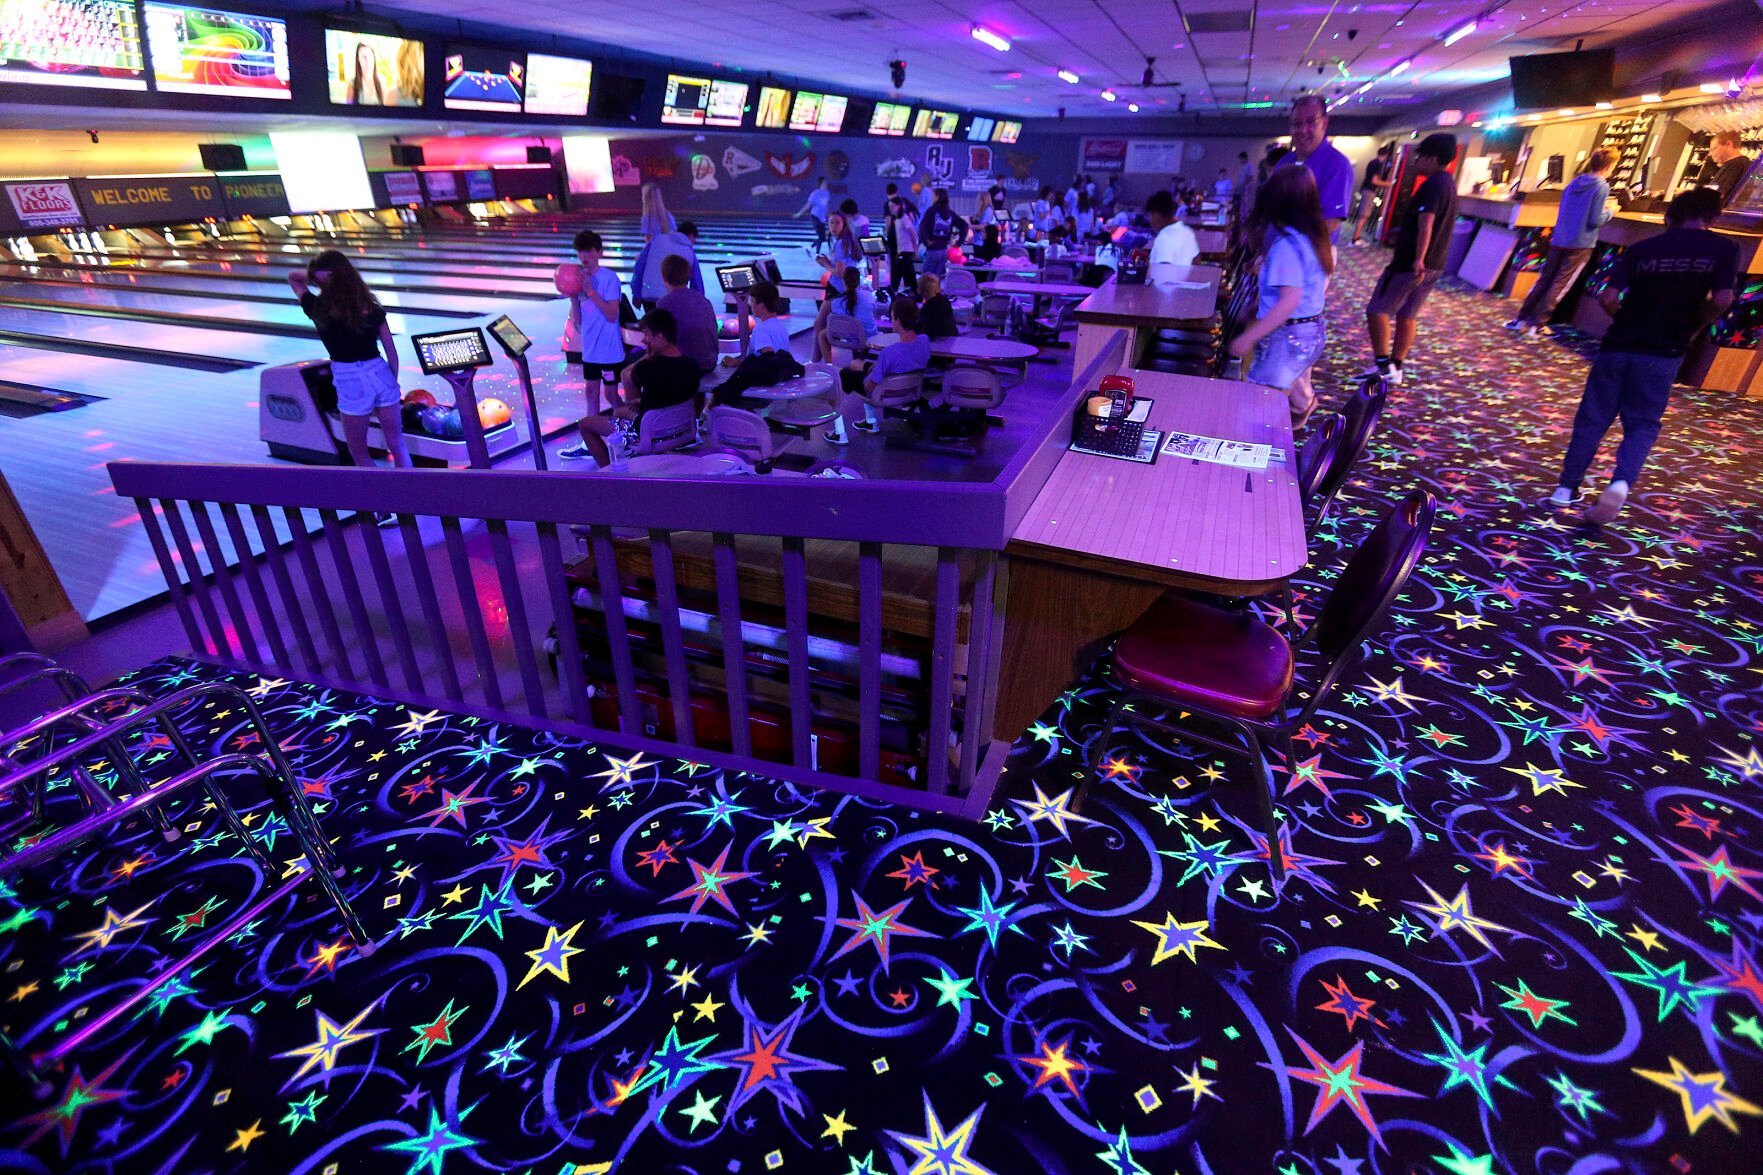 Galena Middle Schoolers take part in cosmic bowling at Pioneer Lanes in Platteville, Wis. recently.    PHOTO CREDIT: Dave Kettering
Telegraph Herald